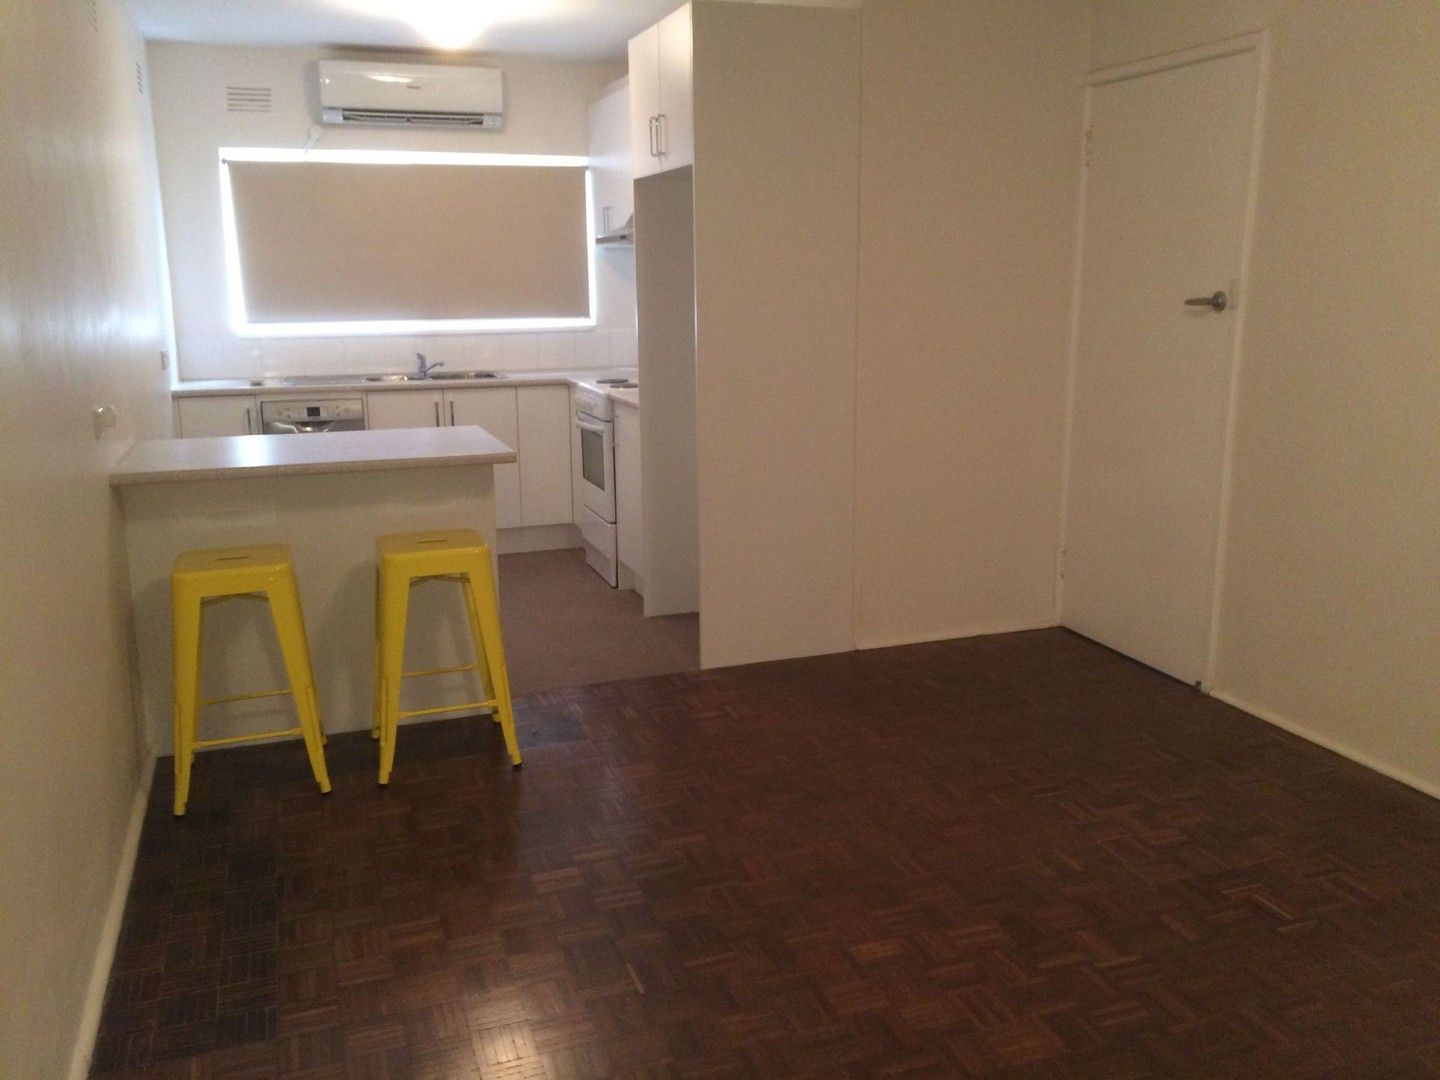 2 bedrooms Apartment / Unit / Flat in 15/141 Elm Street NORTHCOTE VIC, 3070